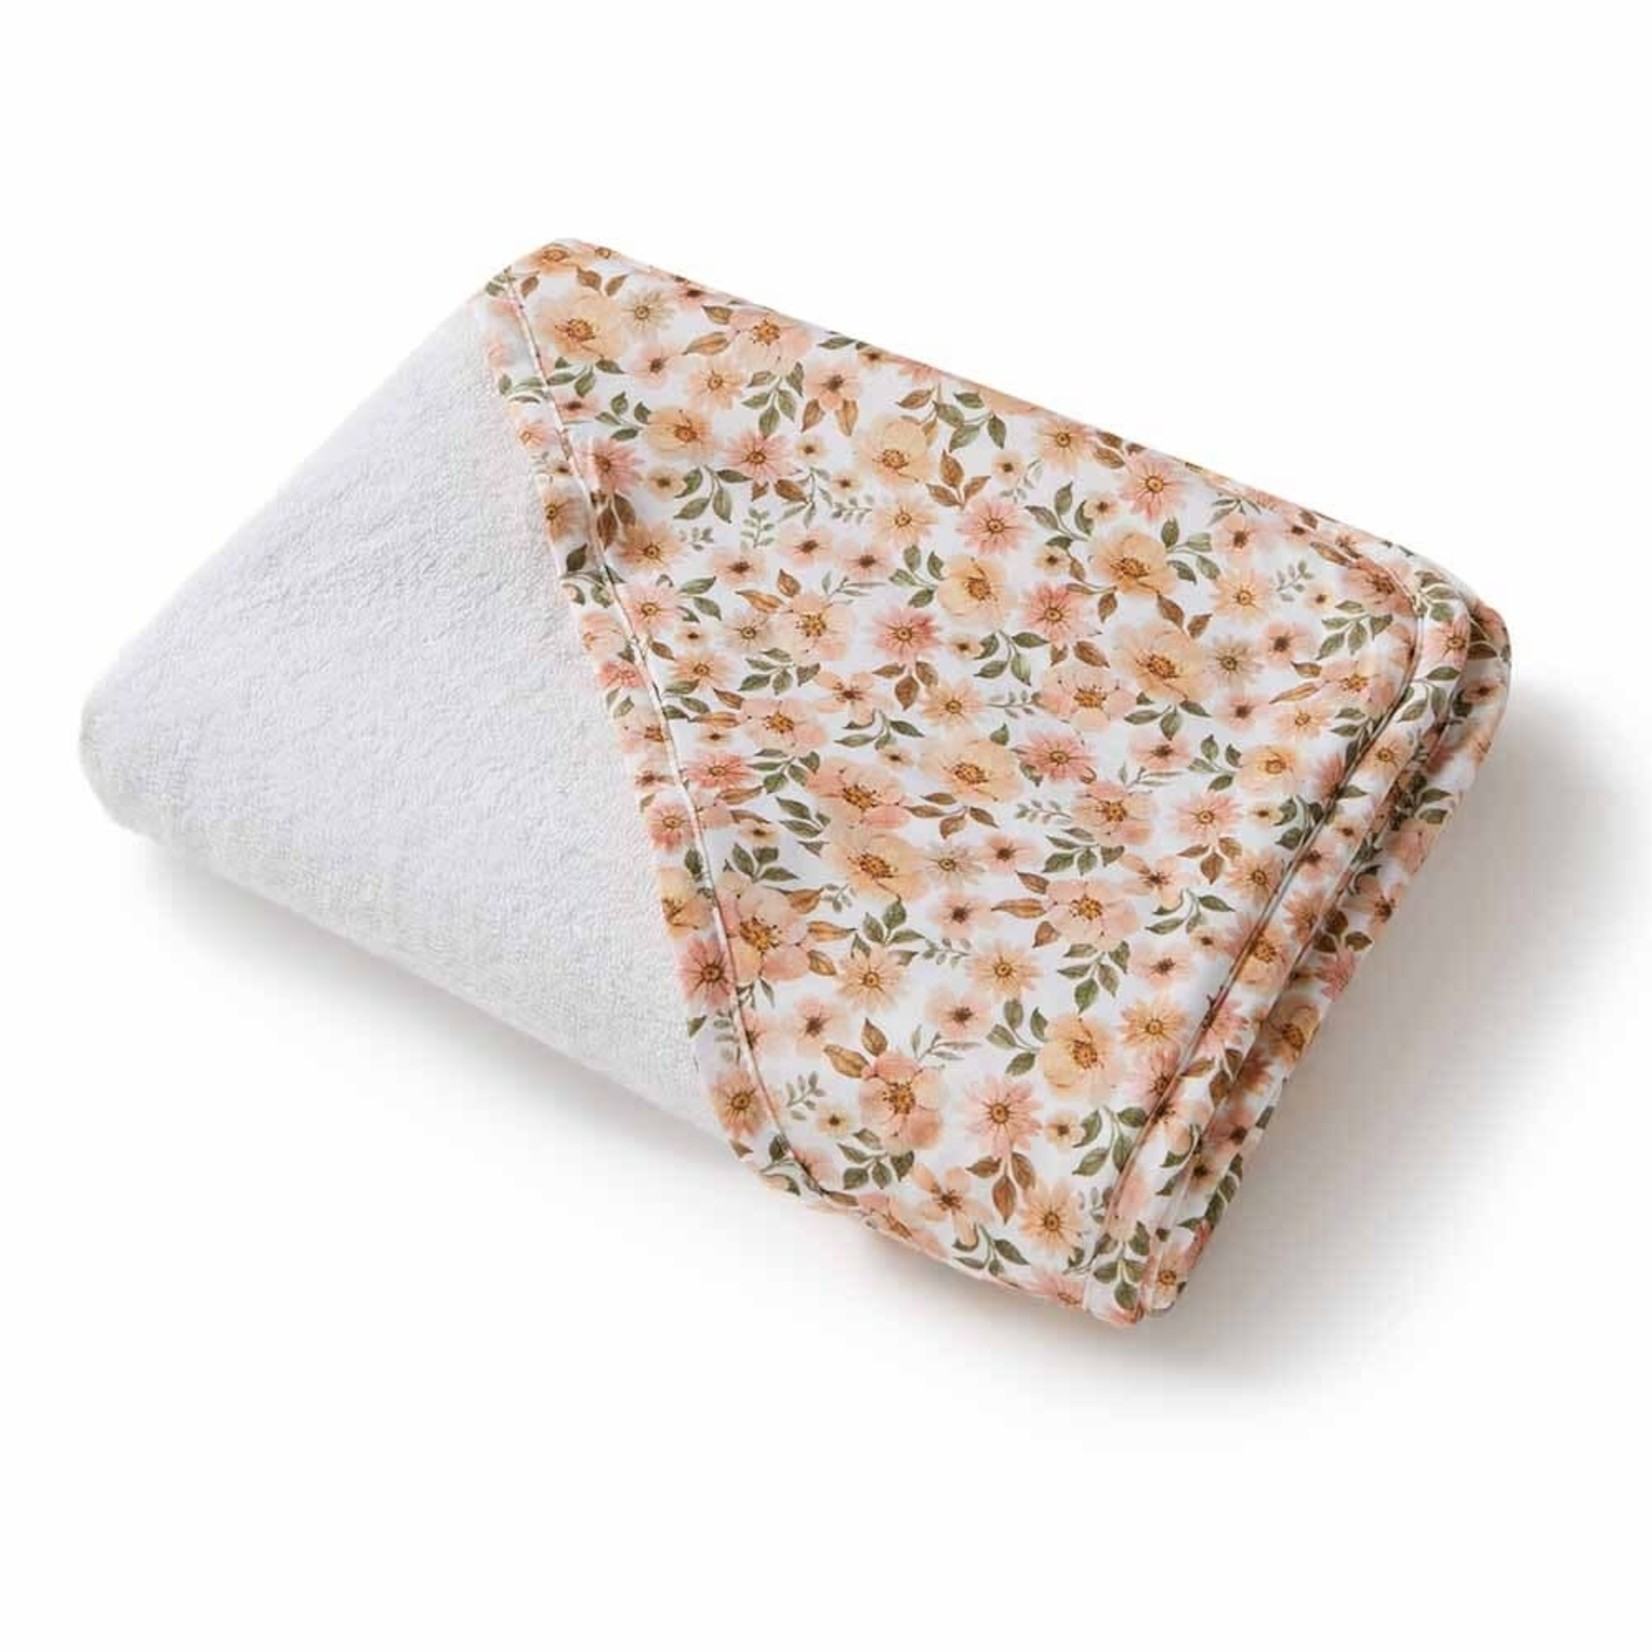 Snuggle Hunny Organic Hooded Baby Towel-Spring Floral